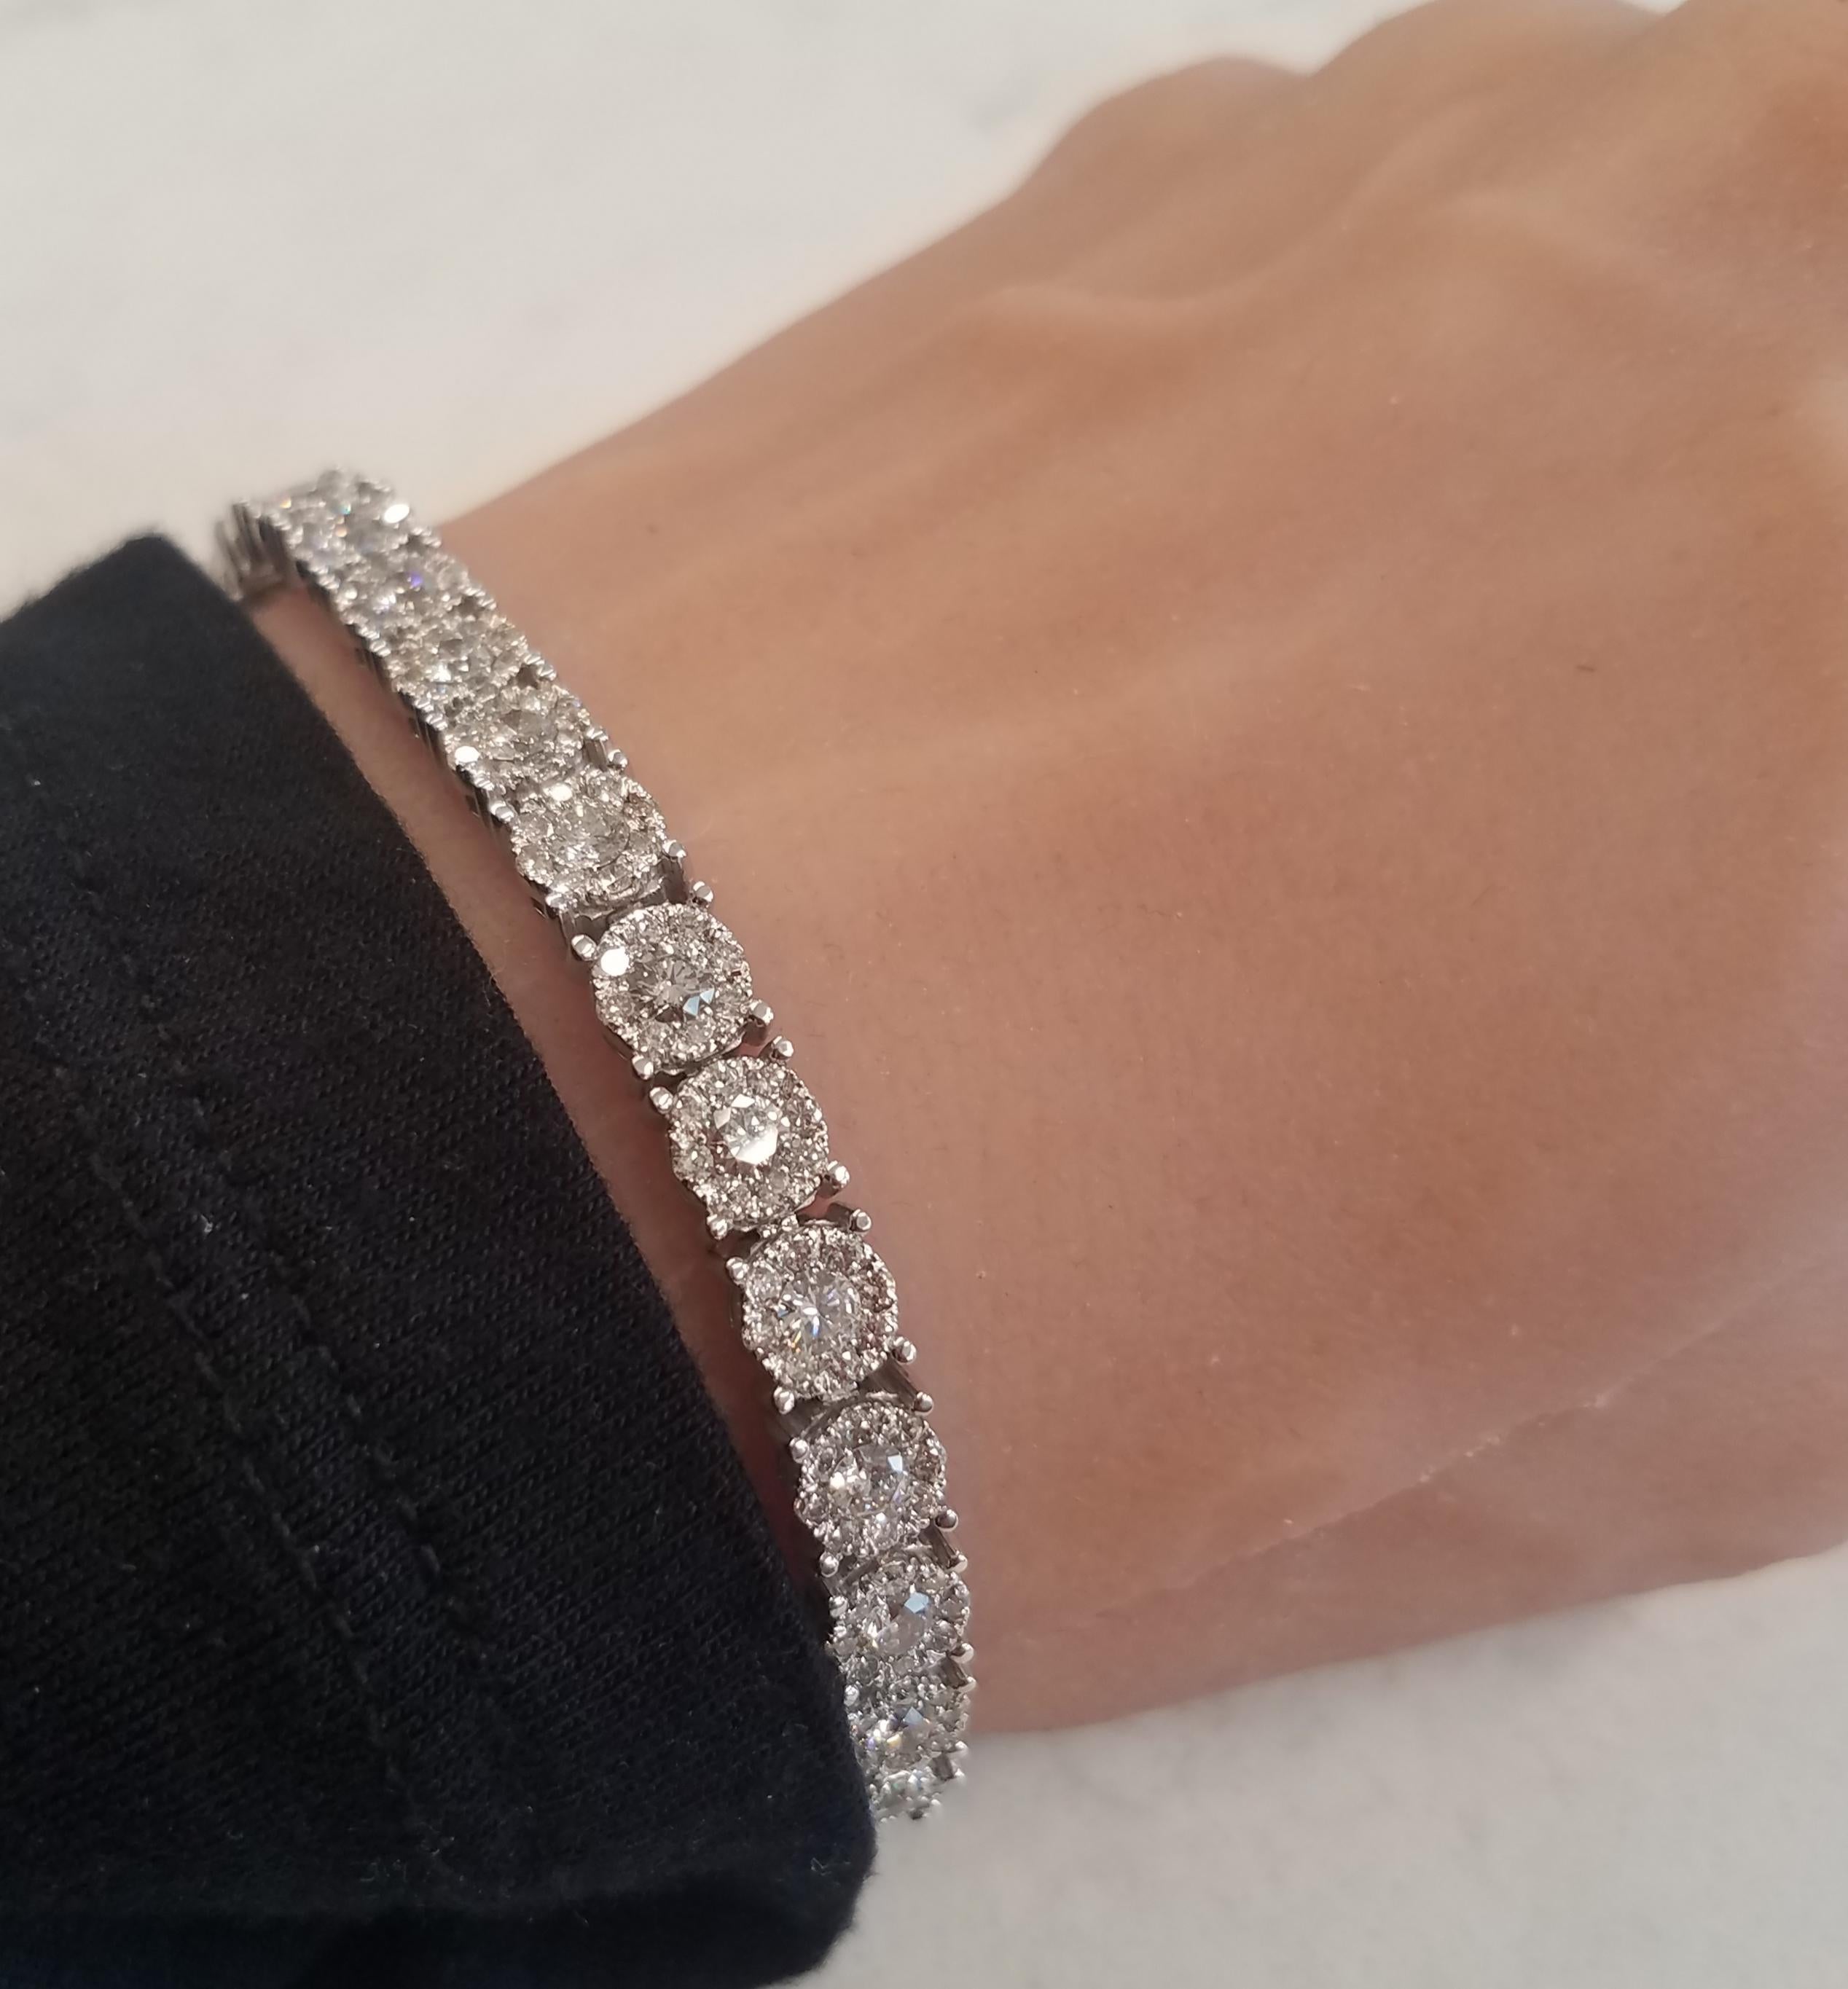 This brightly polished 14k white gold eternity bracelet showcases 261 sparkling round brilliant cut diamonds prong set into circular disc halo links in a dazzling display, totaling 6.30 carats. Perfect for anniversaries, this gorgeous tennis